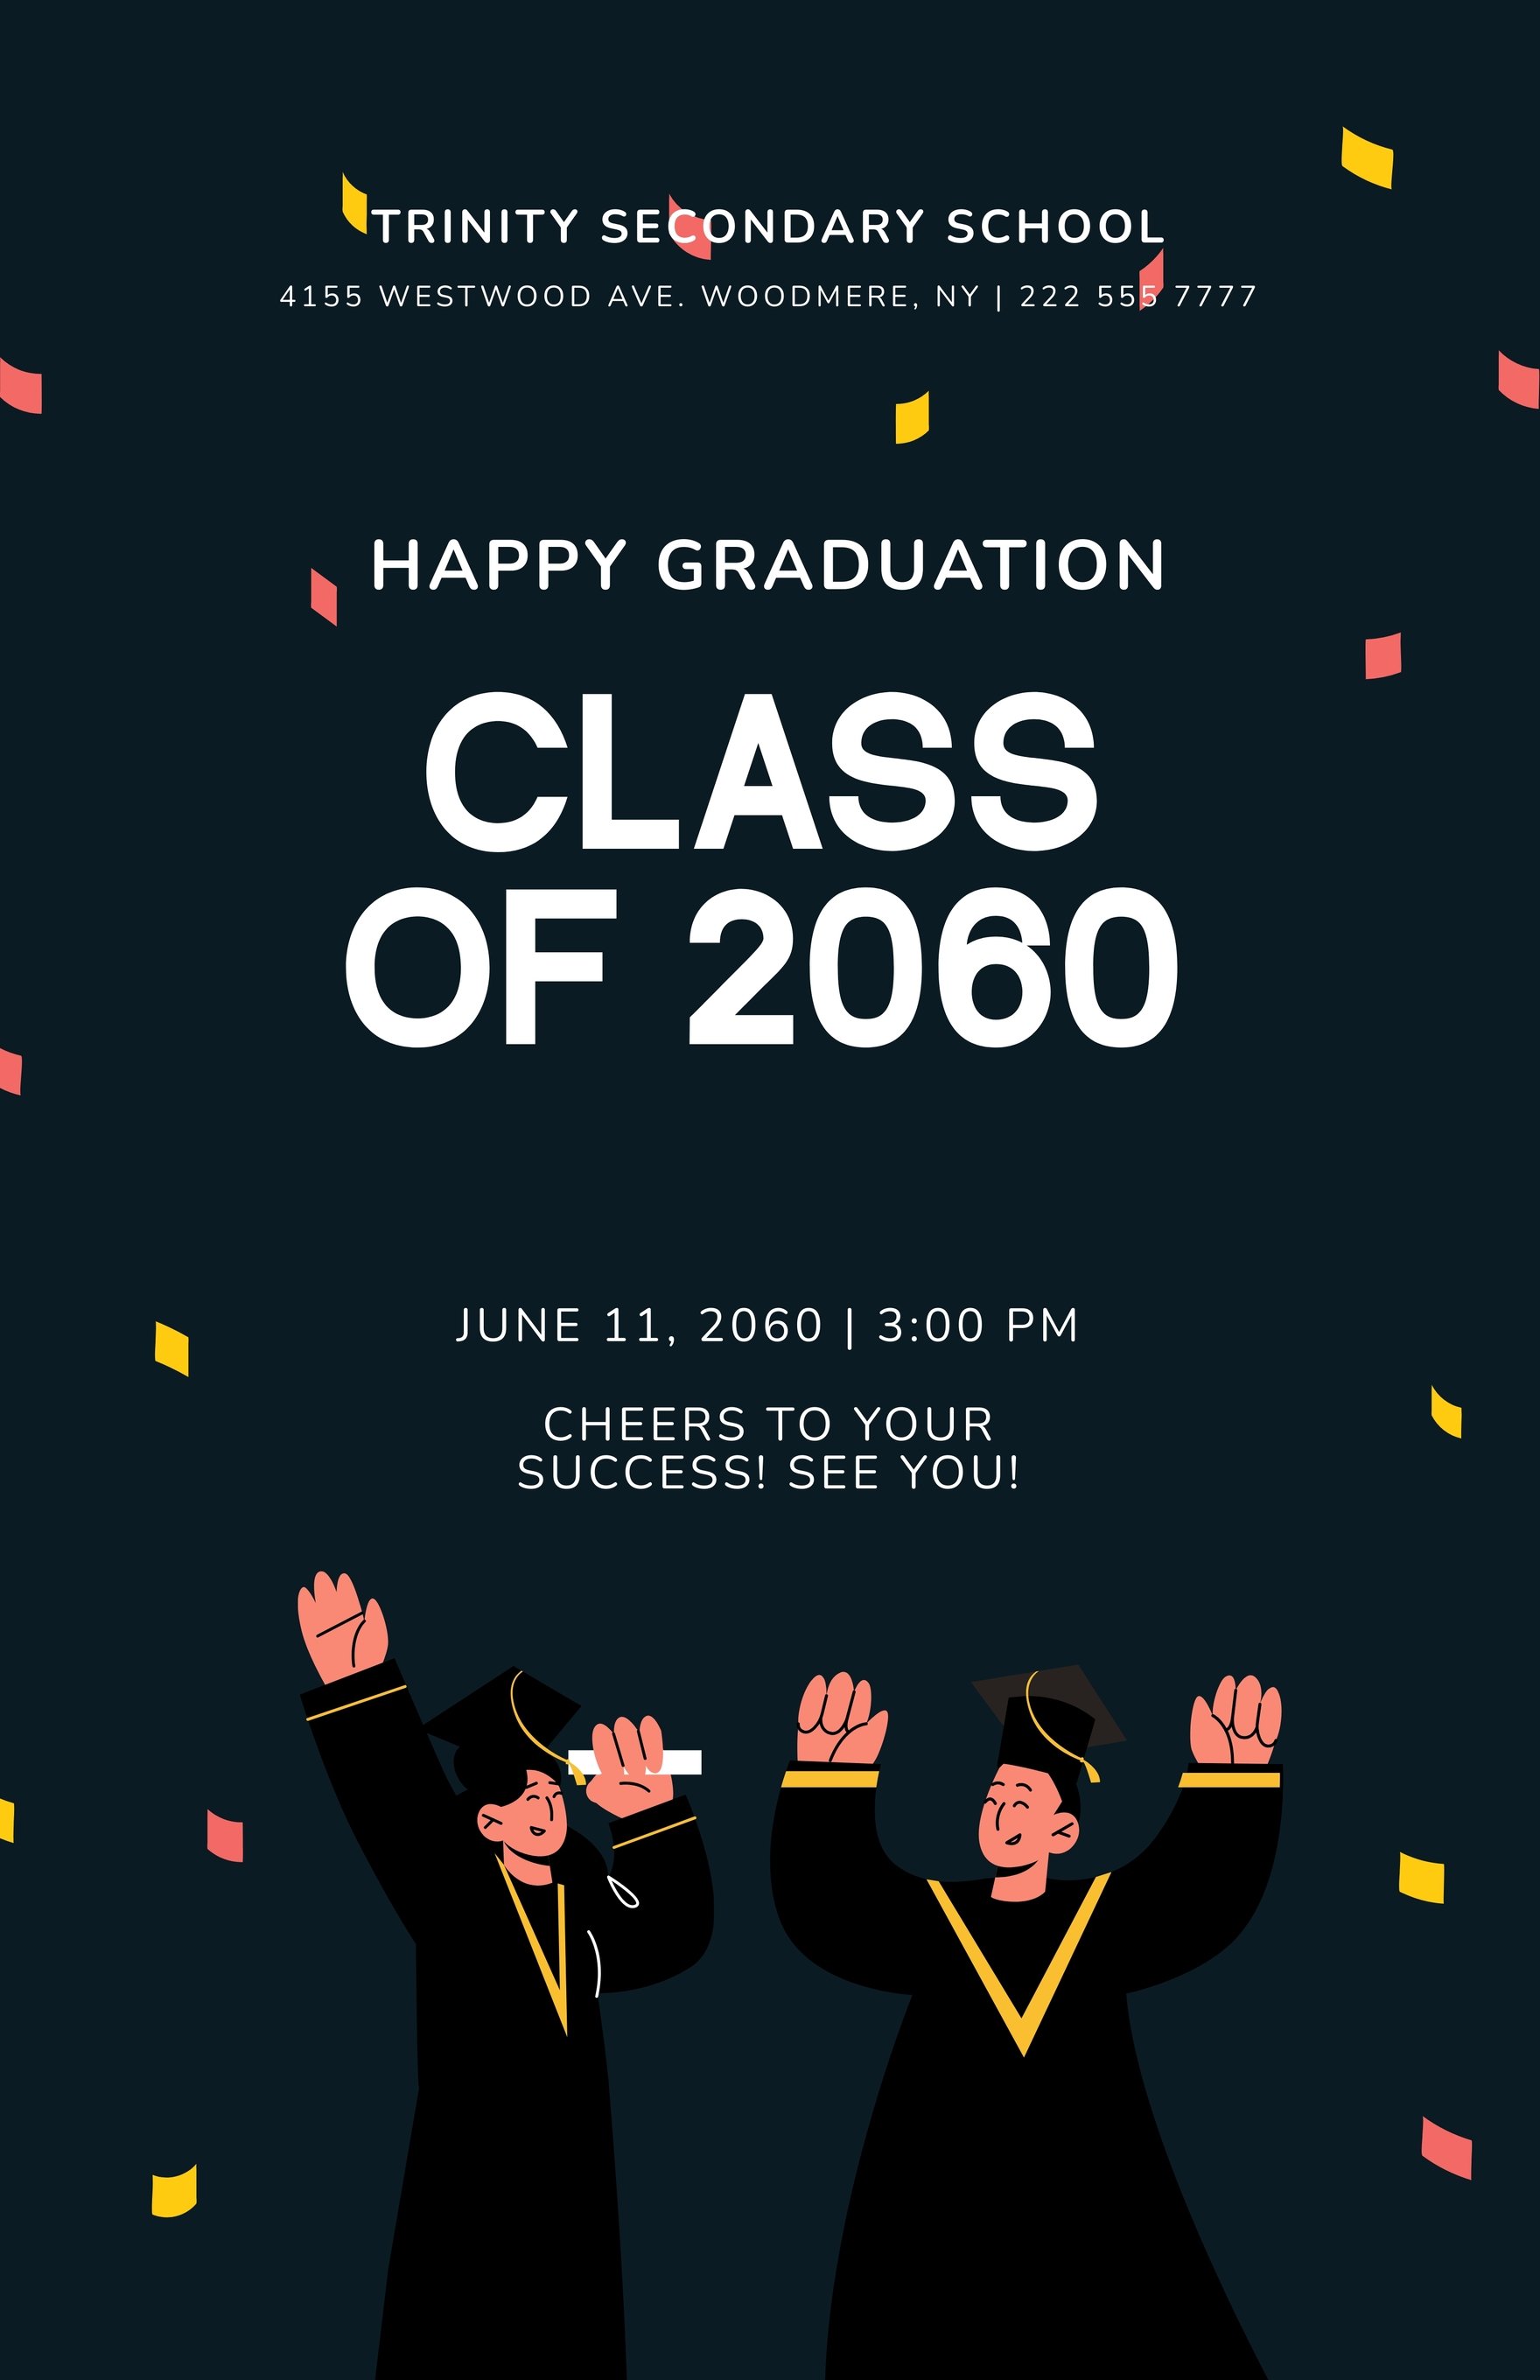 Free Happy Graduation Poster Template in Word, Google Docs, Illustrator, PSD, Apple Pages, Publisher